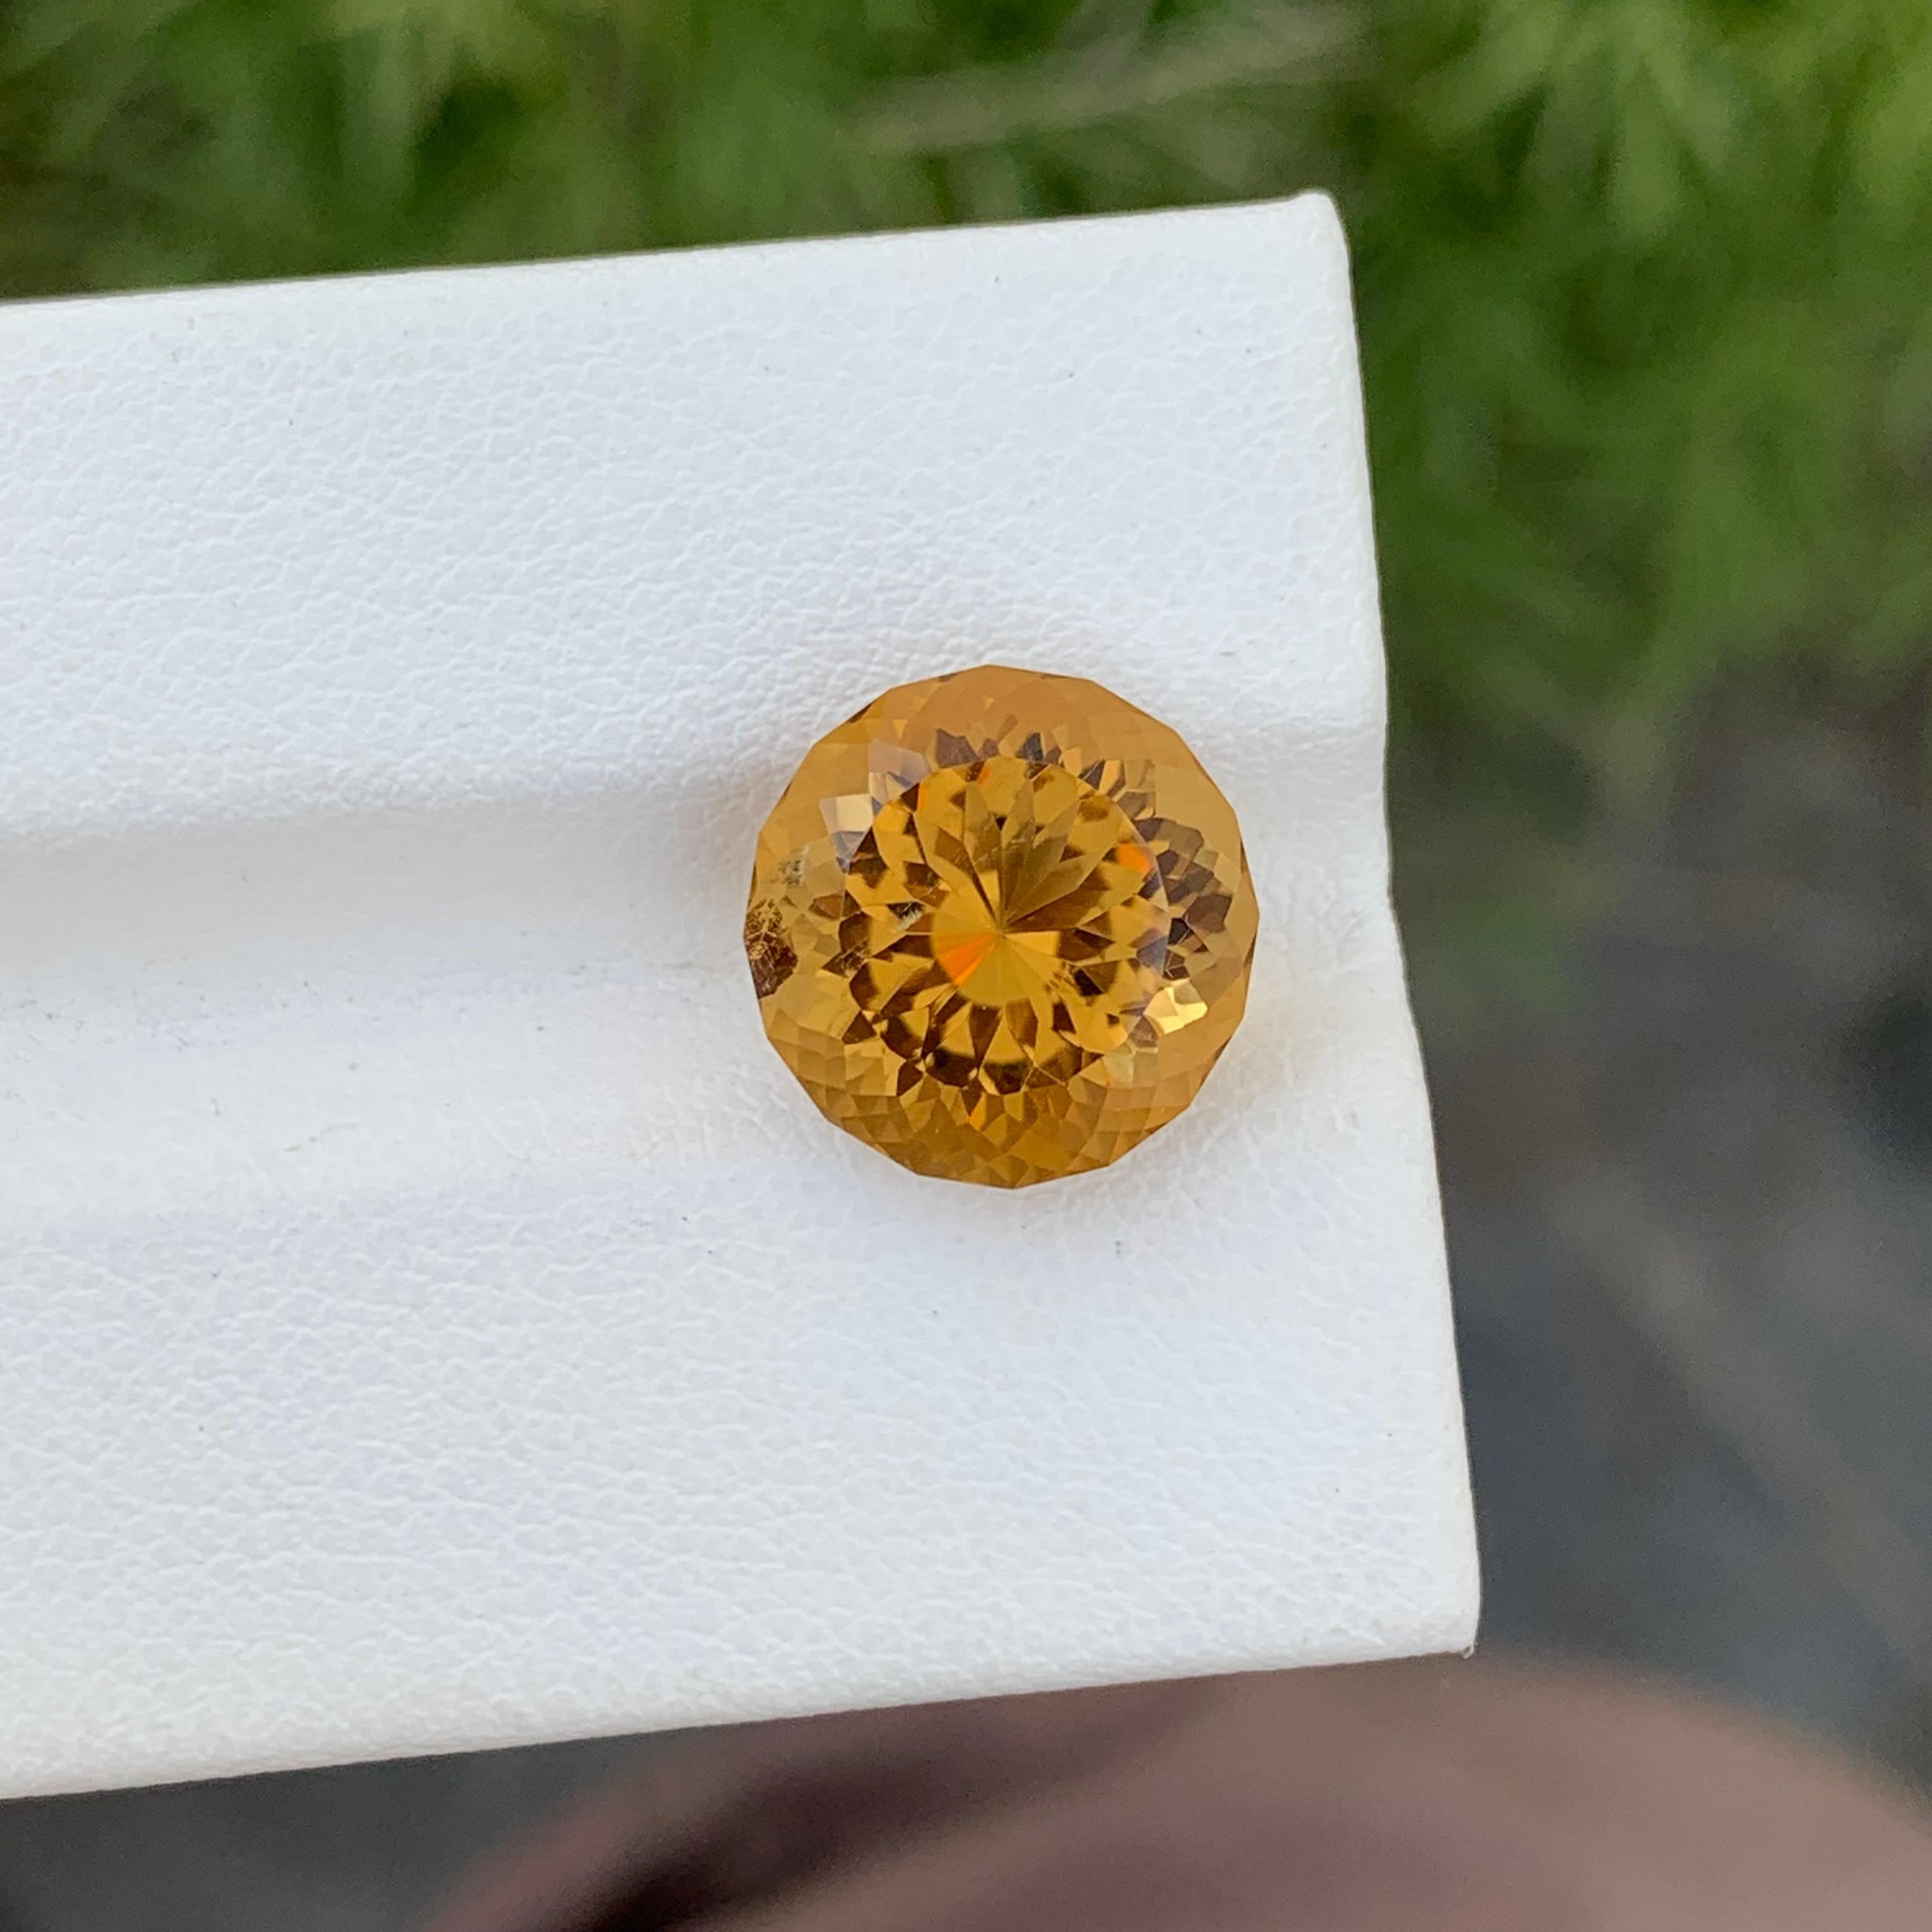 Loose Citrine
Weight: 5.65 Carats
Dimension: 11.7 x 11.7 x 8.1 Mm
Origin: Brazil
Colour: Honey Brown
Treatment: Non
Certficate: On Demand
Shape: Round 


Citrine, a radiant and versatile gemstone, enchants with its warm, golden hues and remarkable